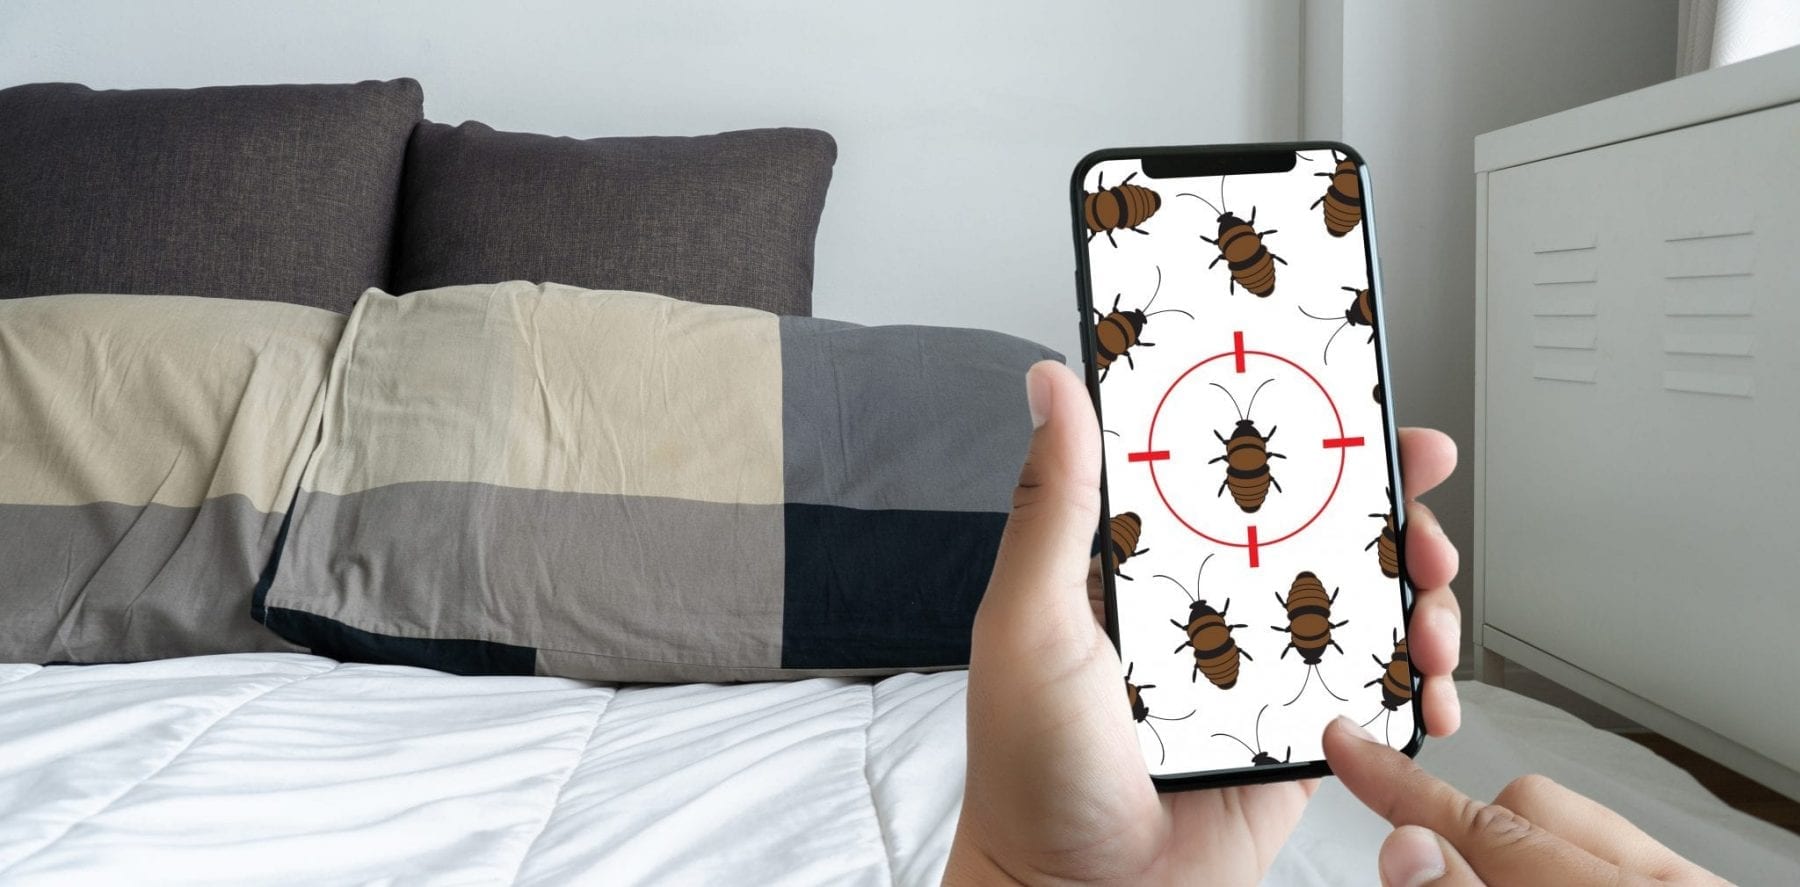 Women checking bed bugs on phone